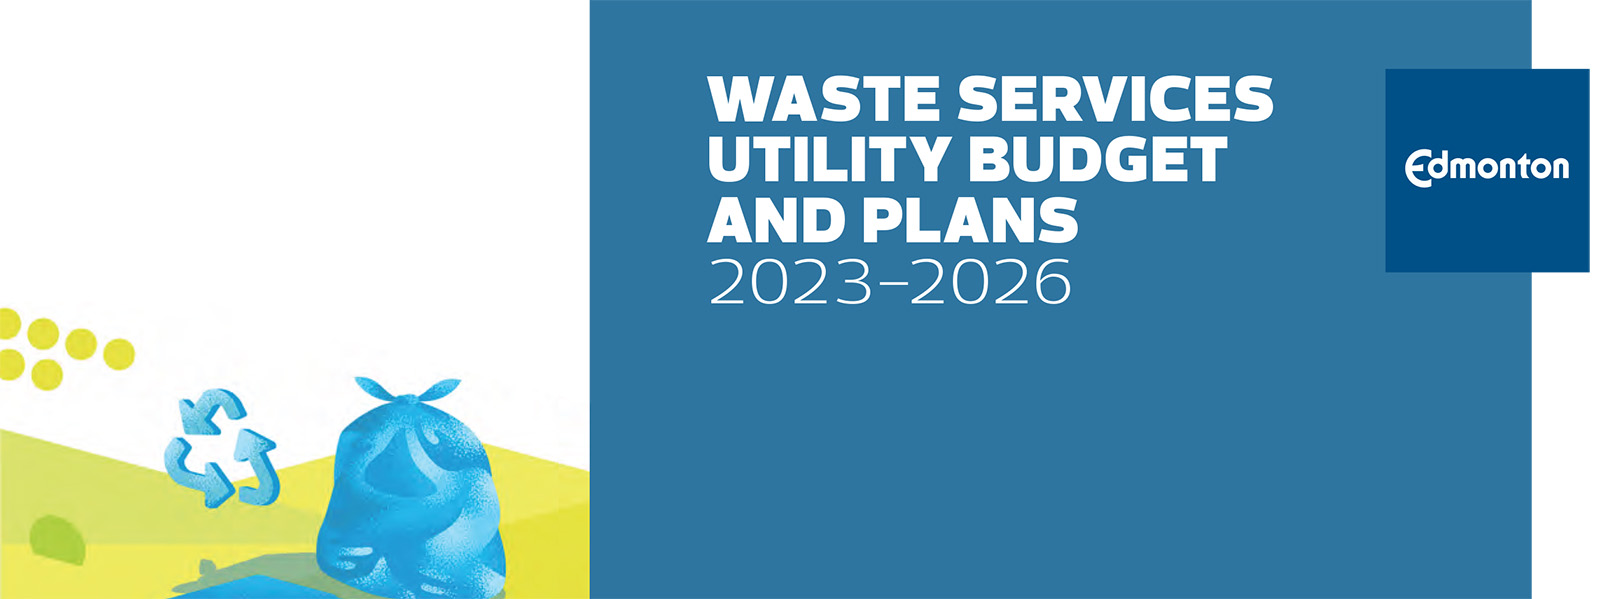 2023-2026 Waste Budget cover